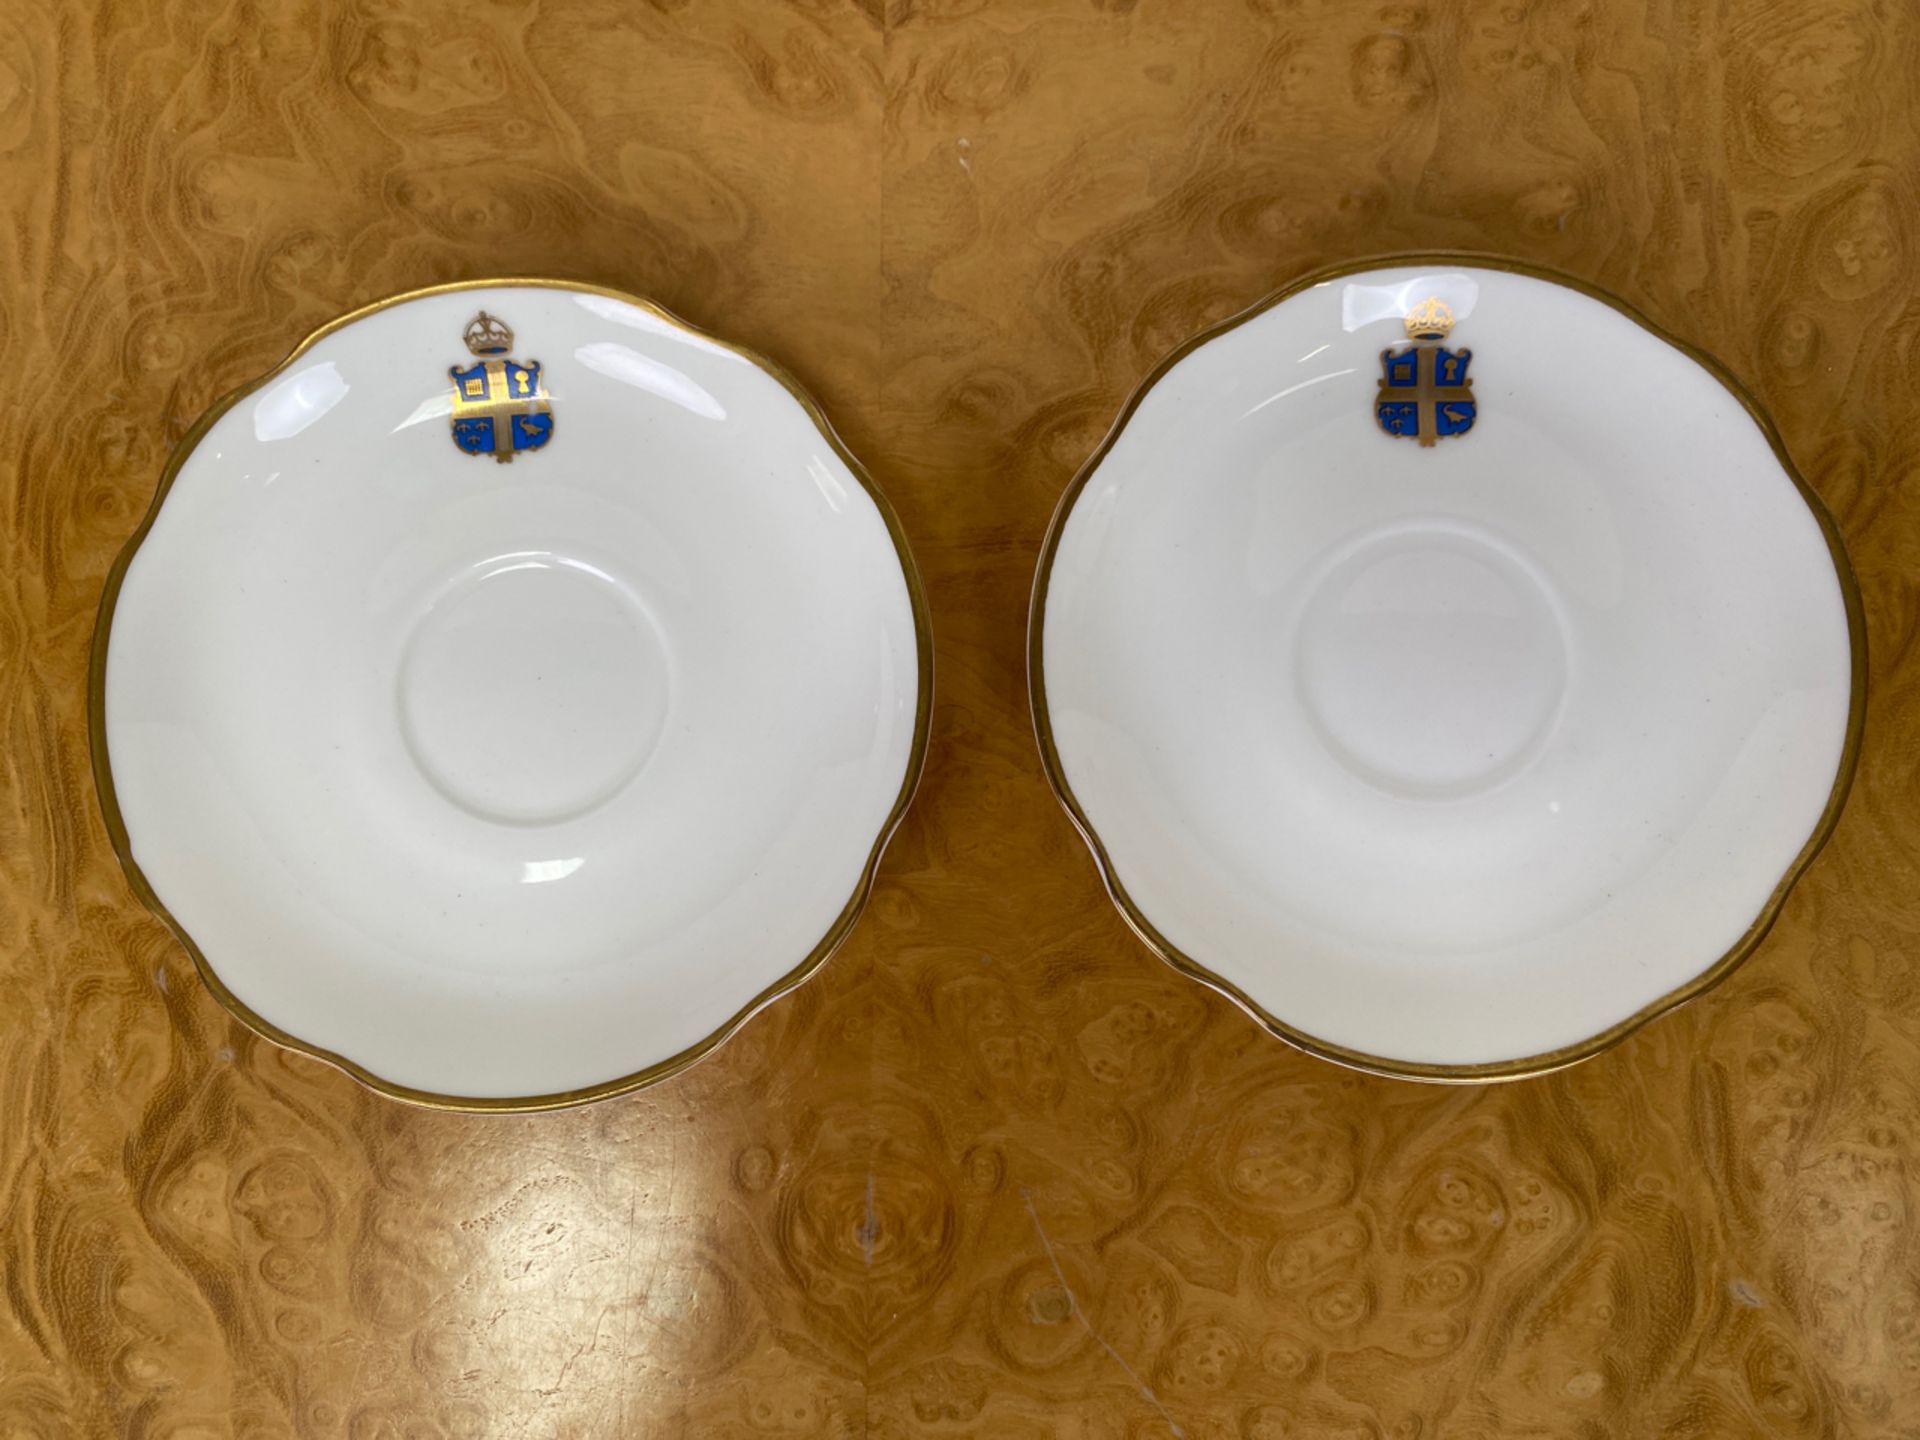 Set of Crested Crockery for Claridge's by Chommette 1884 - Image 9 of 44